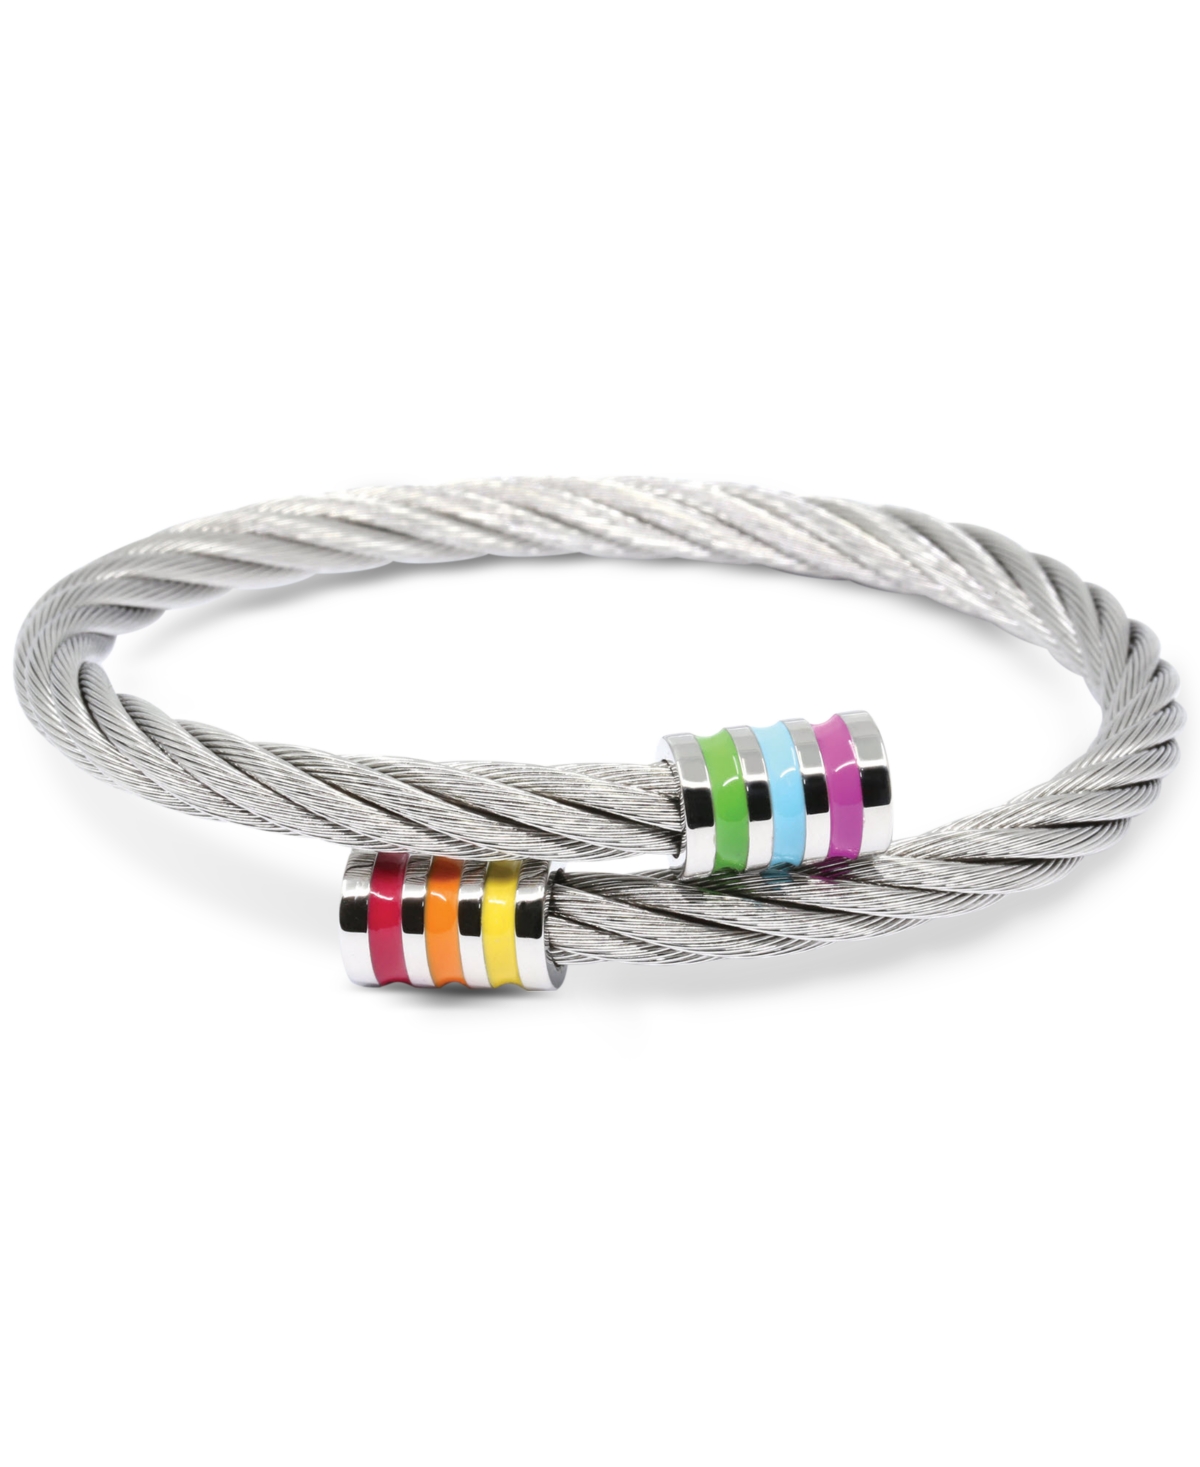 Rainbow Enamel Bypass Cable Bracelet in Stainless Steel - Stainless Steel